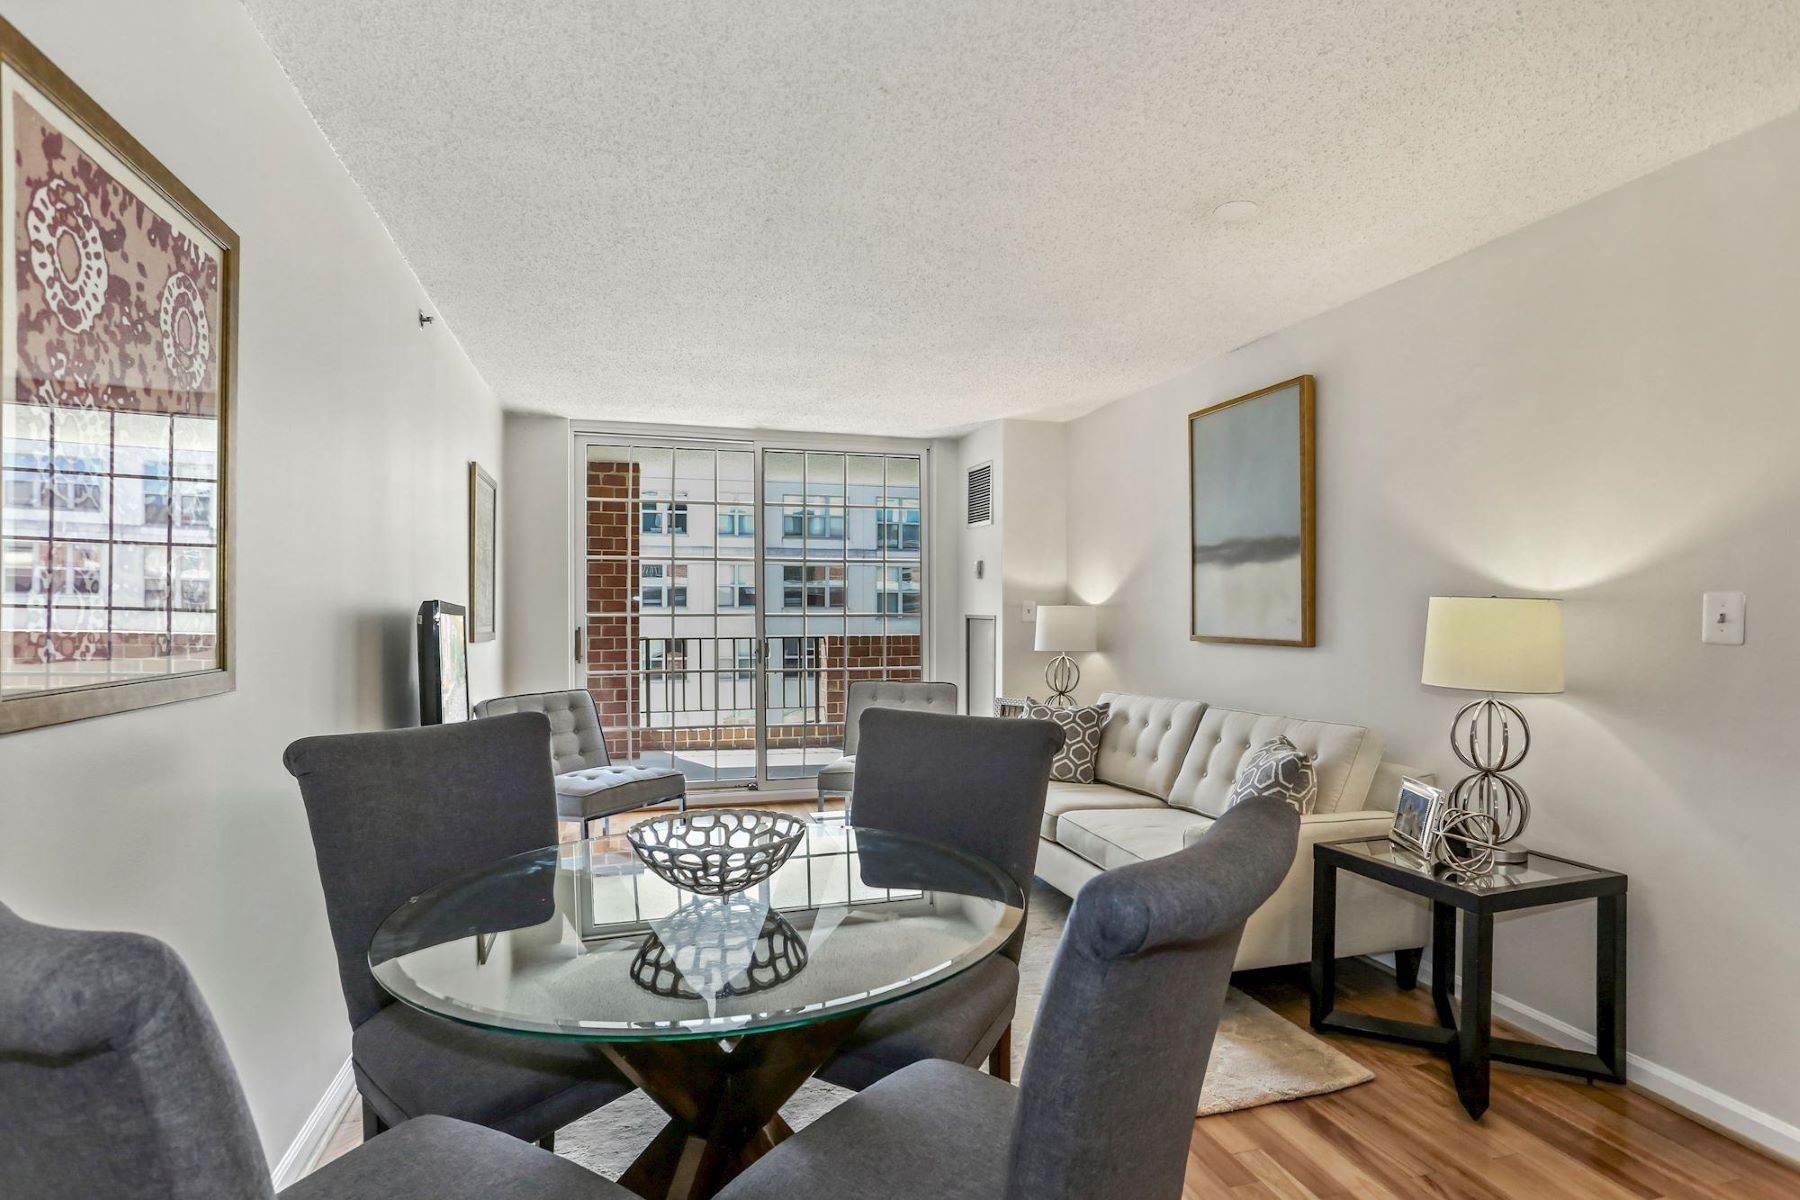 Condominiums for Sale at 1230 23rd St Nw #706 Washington, District Of Columbia 20037 United States